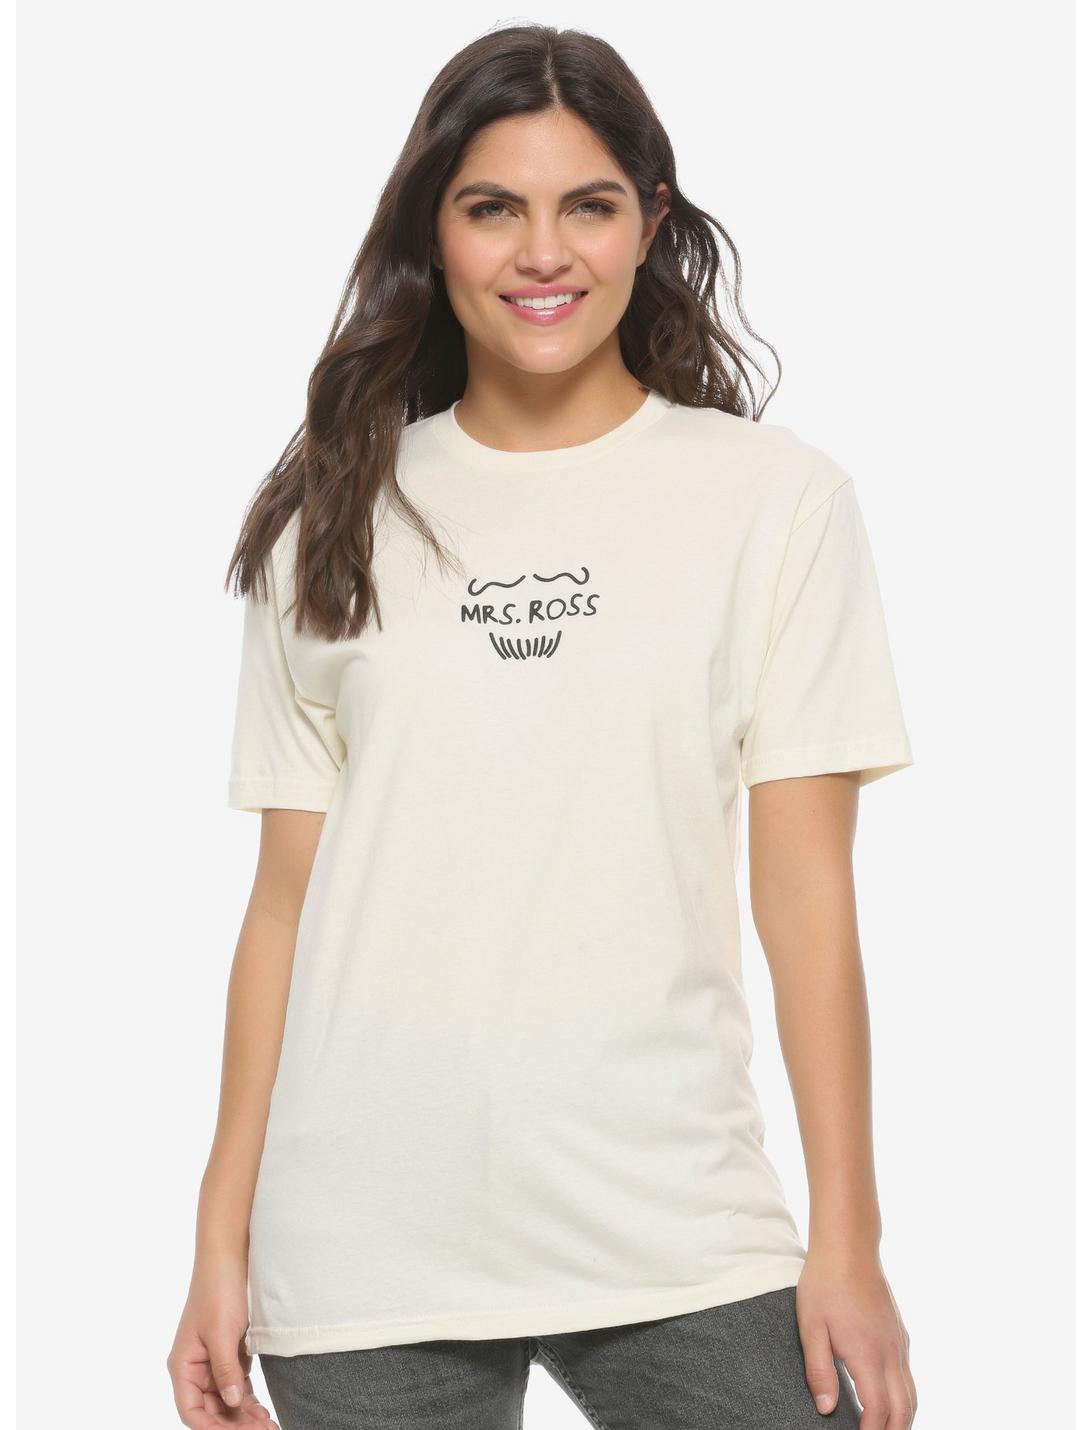 Friends Mrs. Ross Couples T-Shirt - BoxLunch Exclusive | BoxLunch